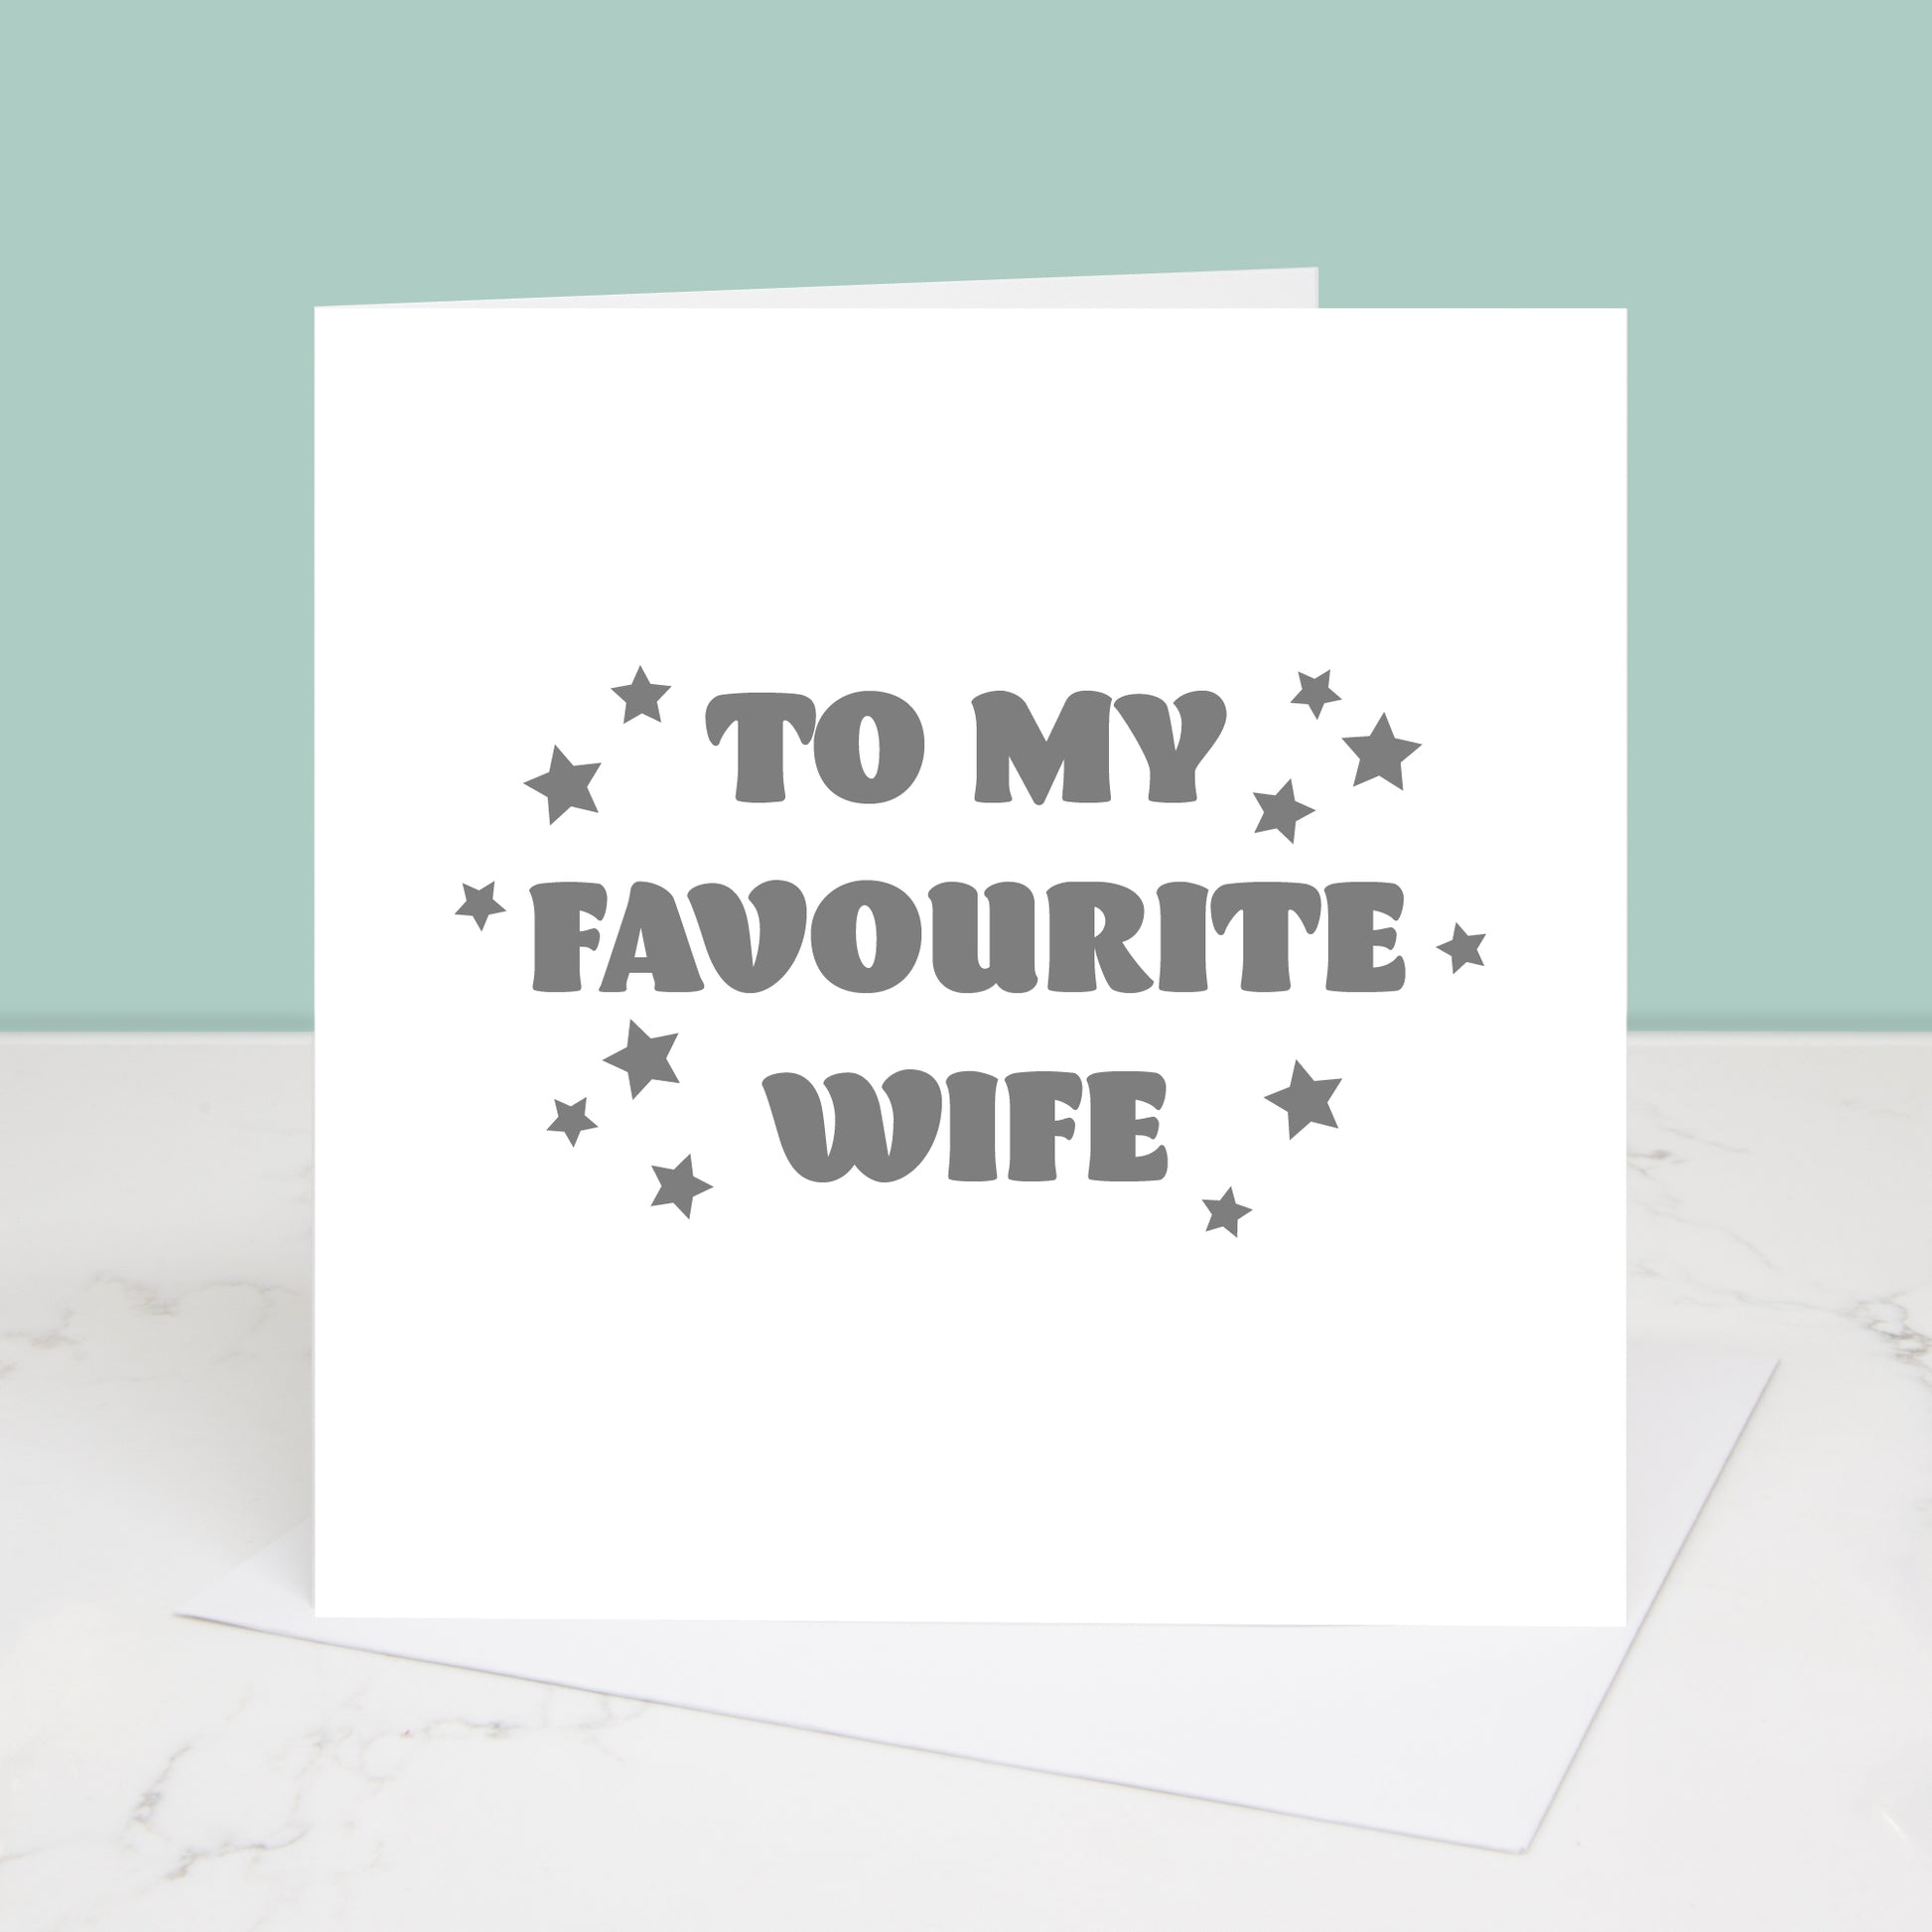 My Favourite Wife Valentine's Day Card in grey. All images and designs © Slice of Pie Designs